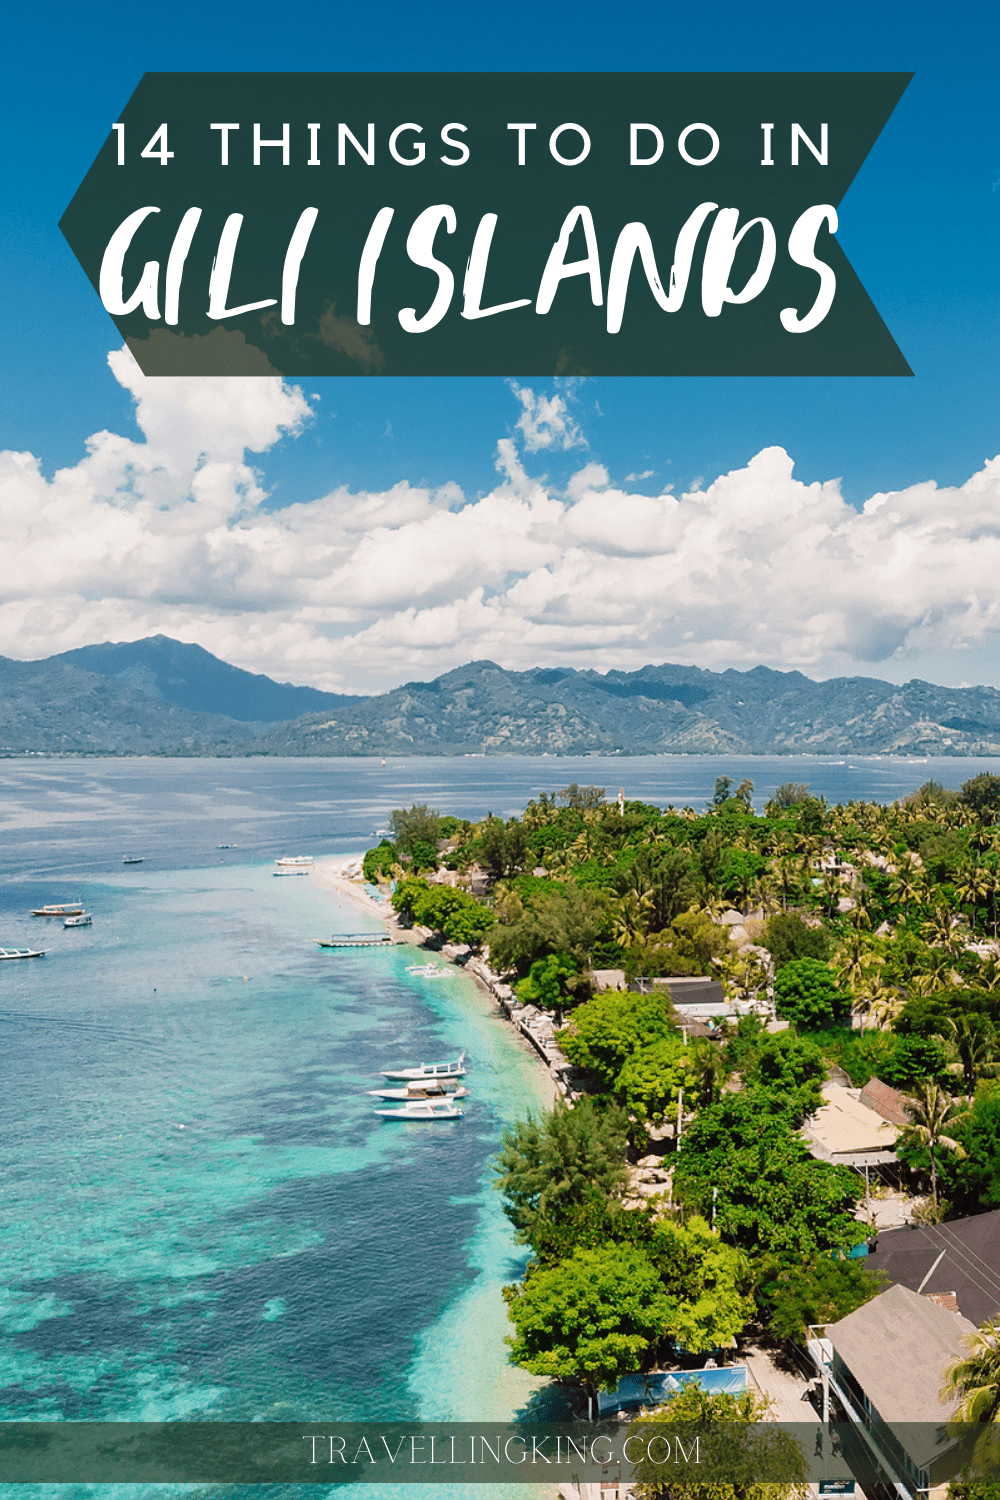 14 Things to do in Gili Islands